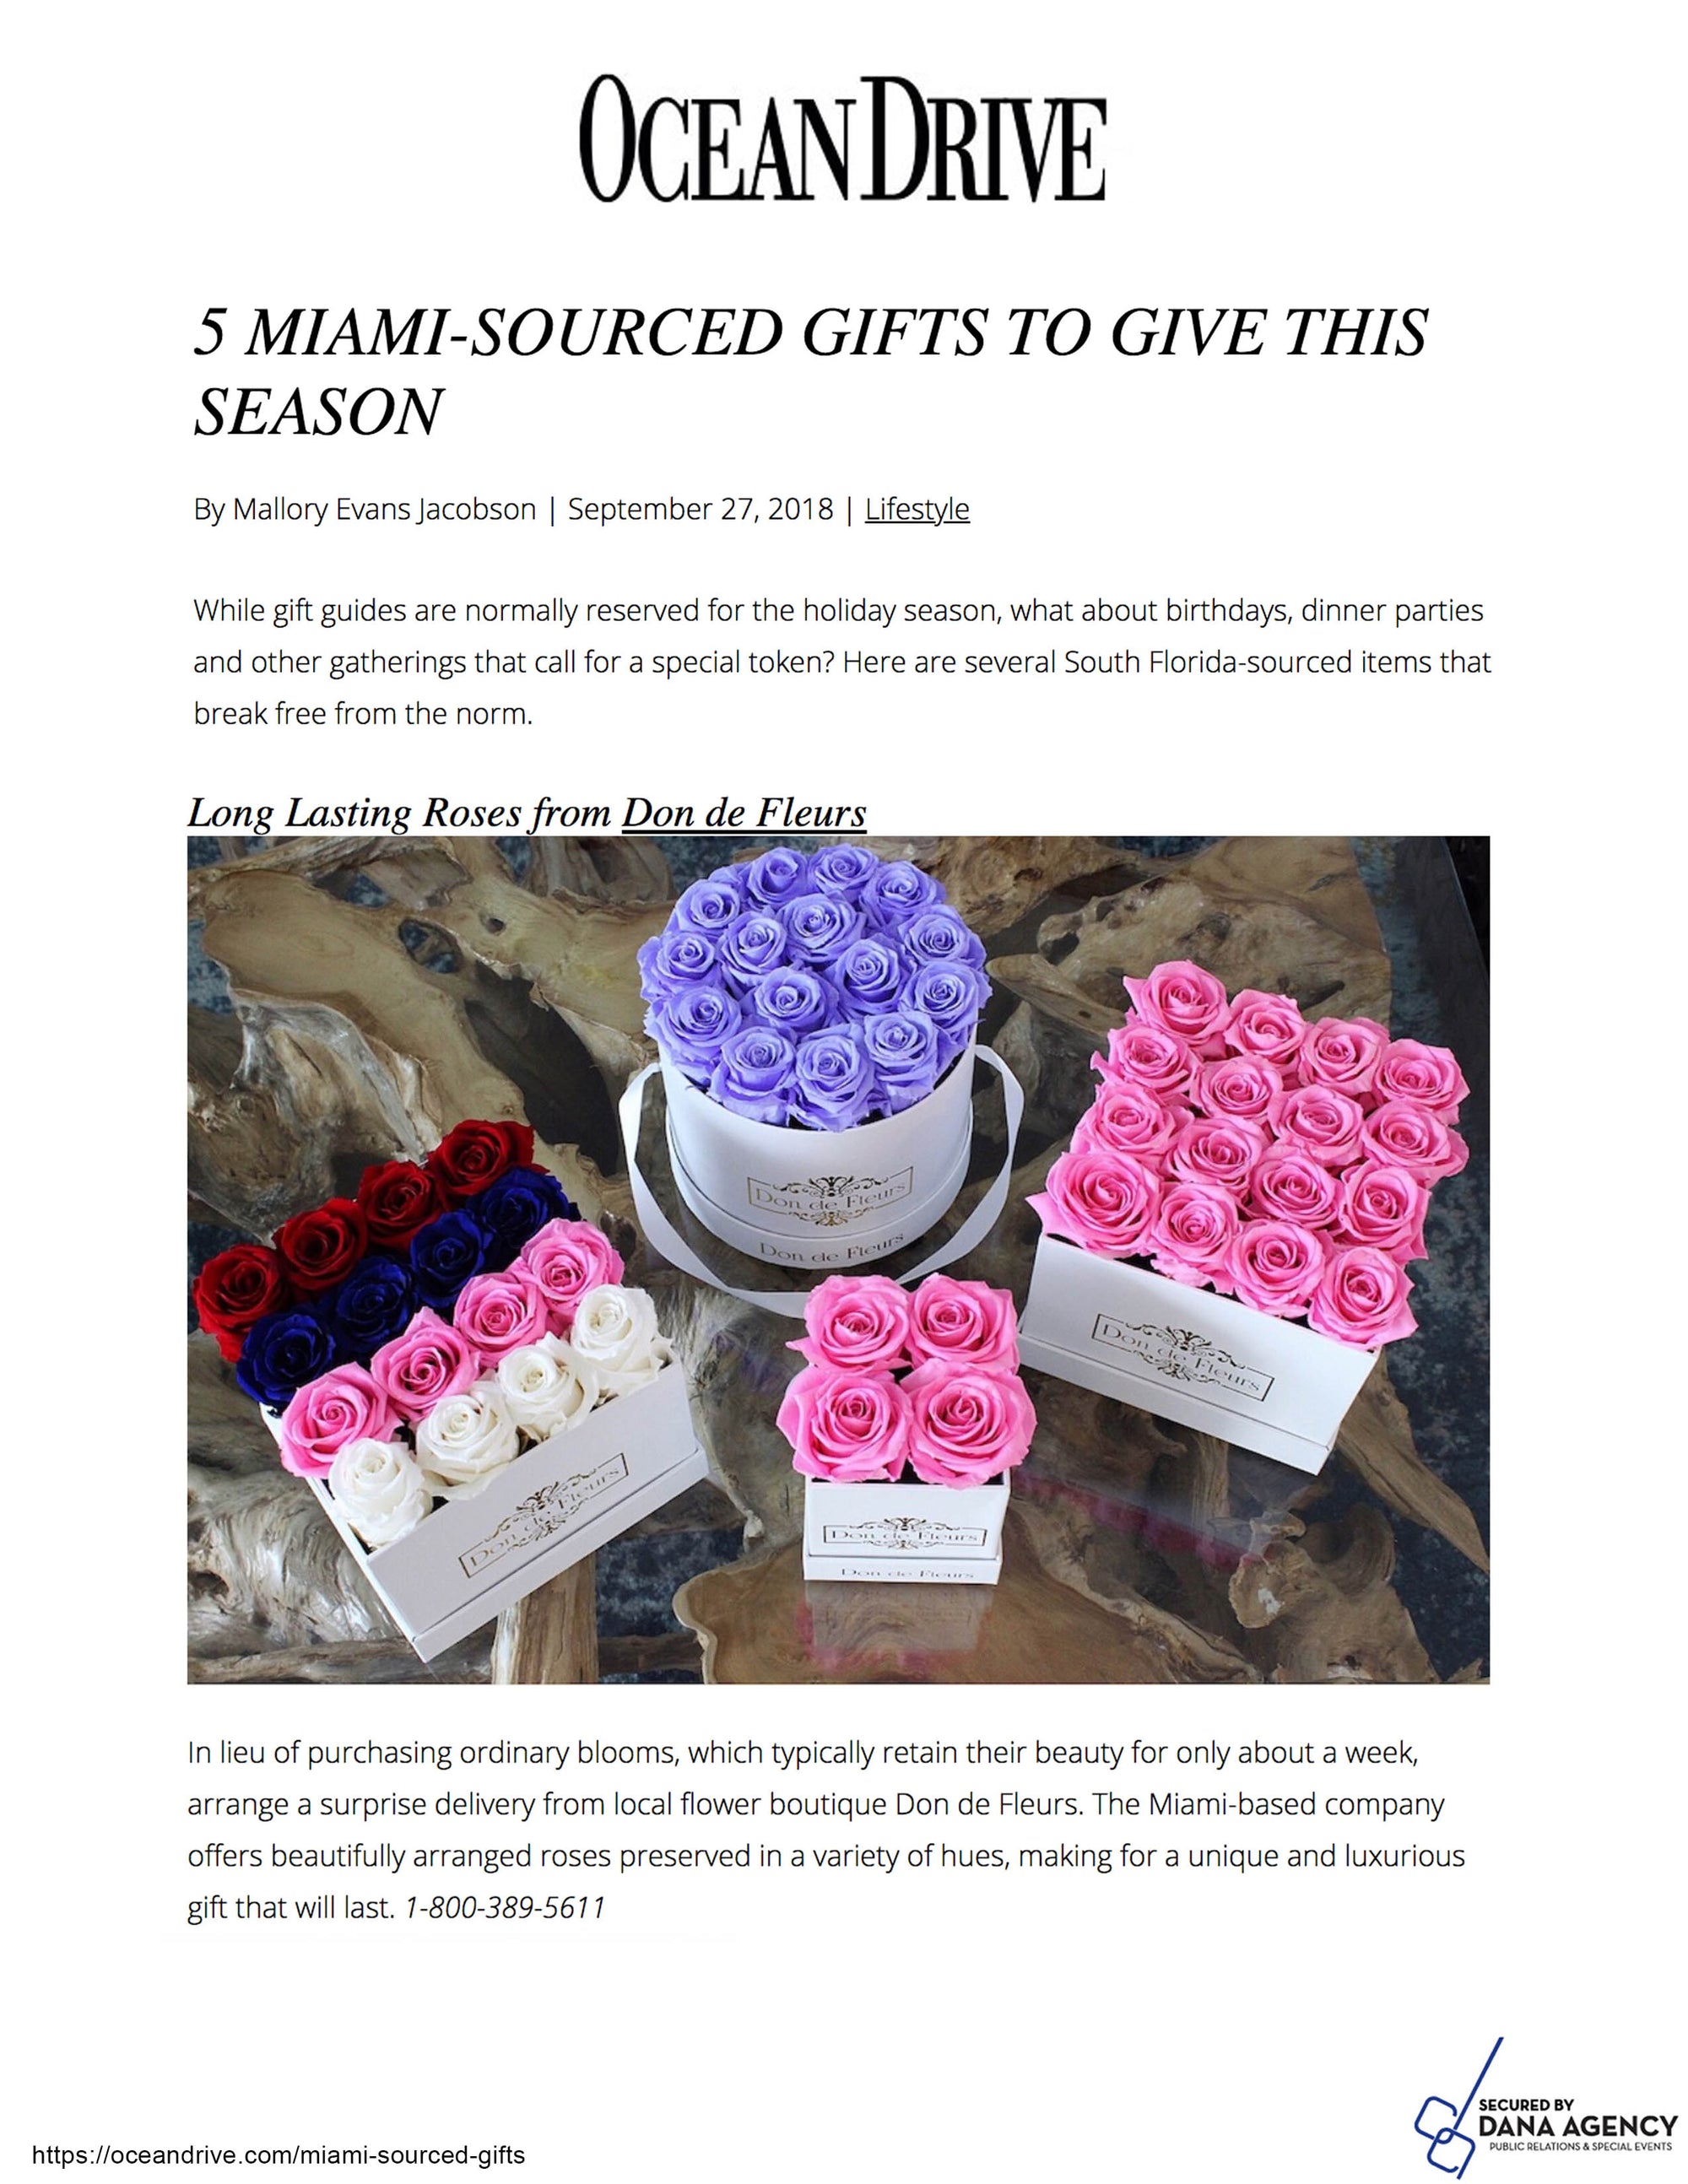 5 MIAMI- SOURCED GIFTS TO GIVE THIS SEASON